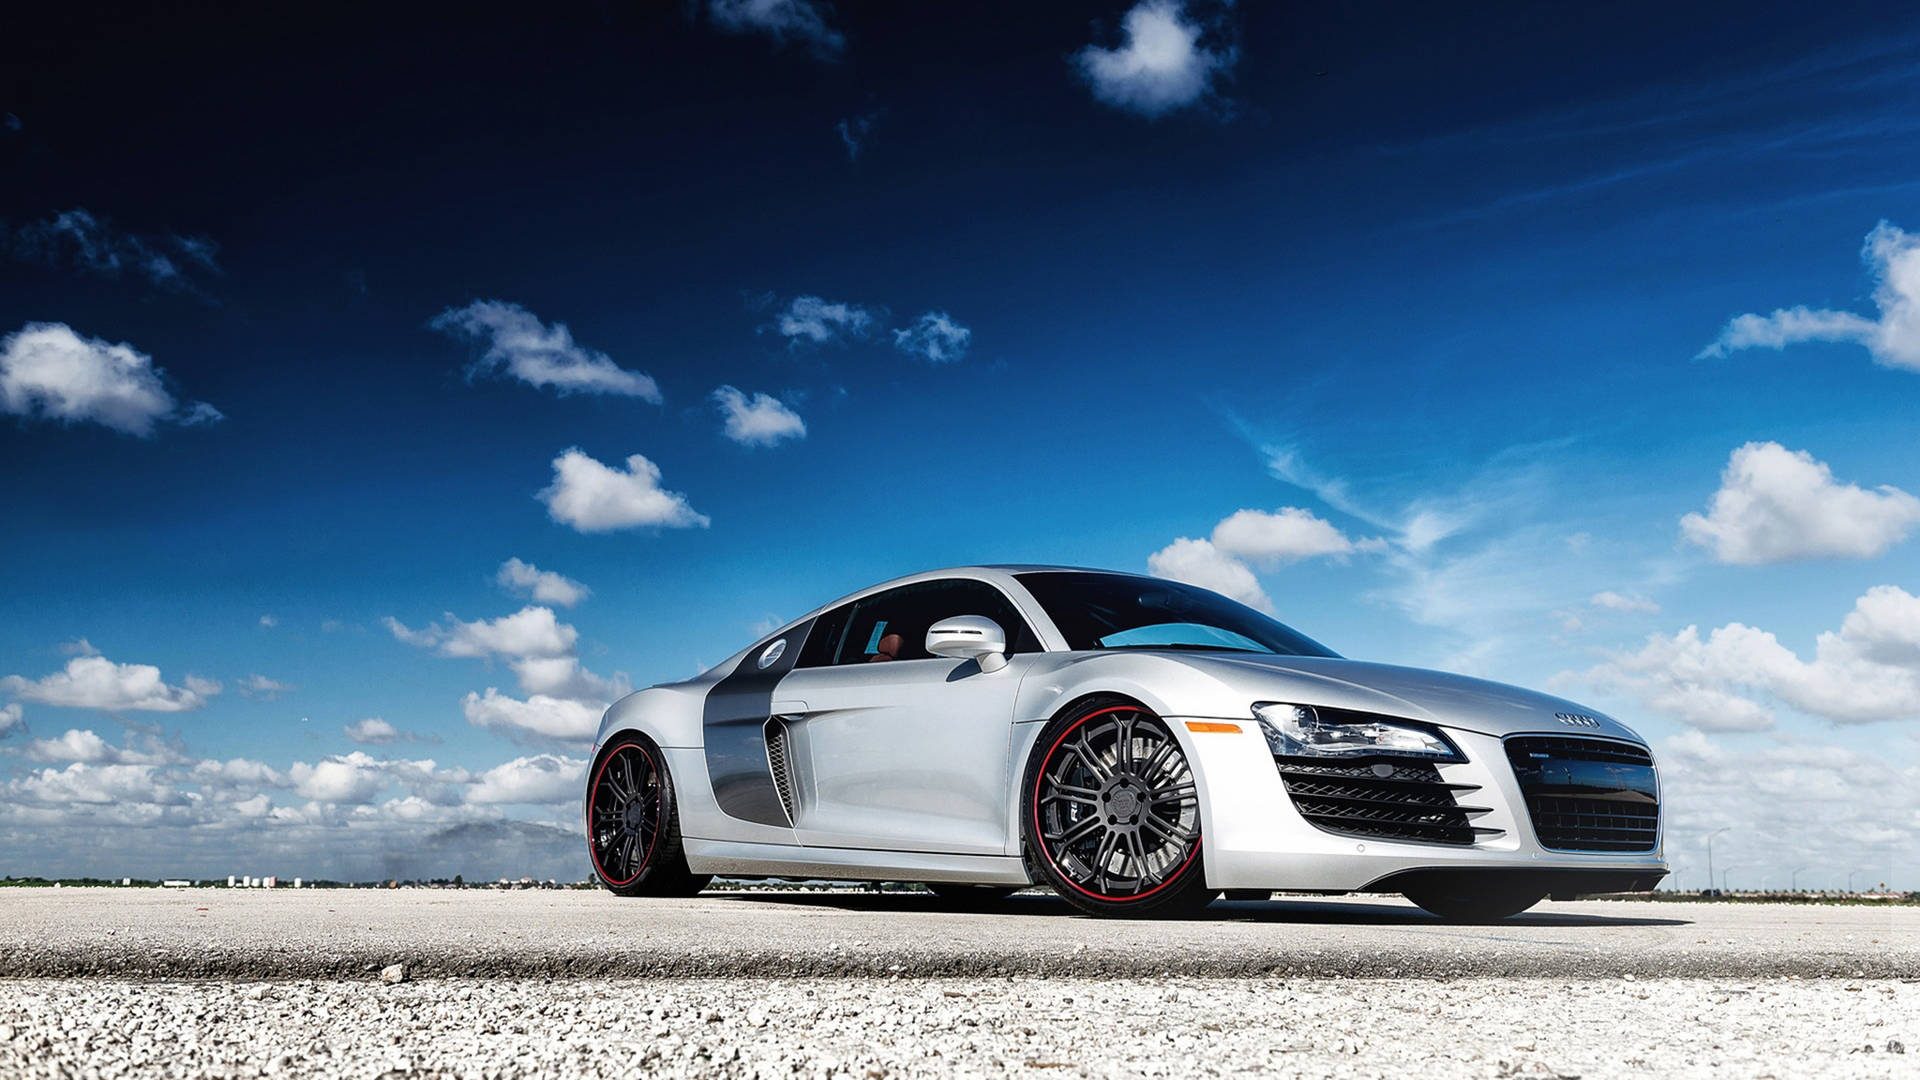 Stunning 2012 Audi R8 – The Embodiment Of Cool Cars Background